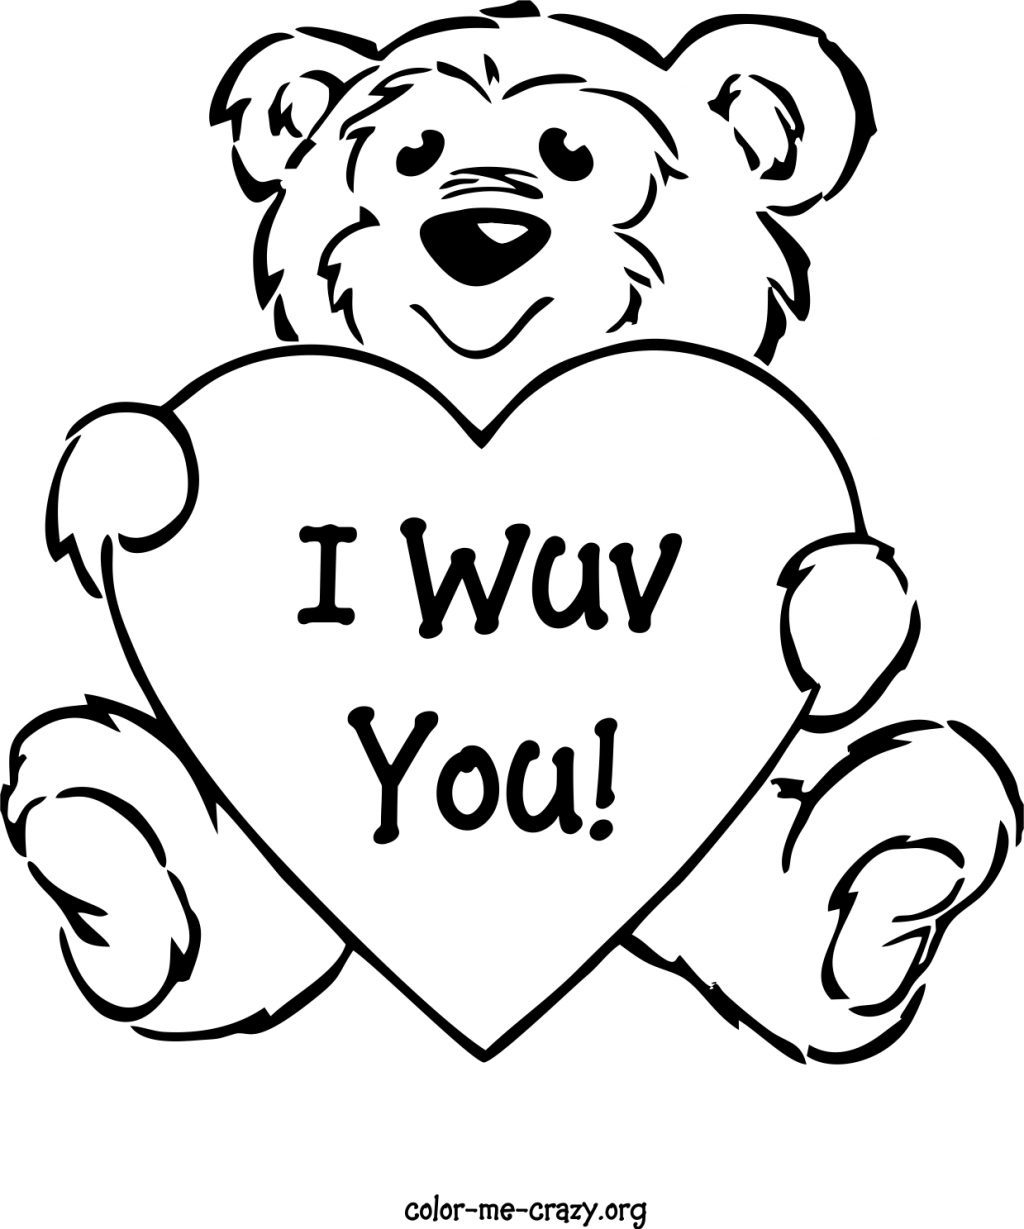 Preschool Valentines Day Coloring Pages Coloring Books Fabulous Valentines Day Coloring Sheets For